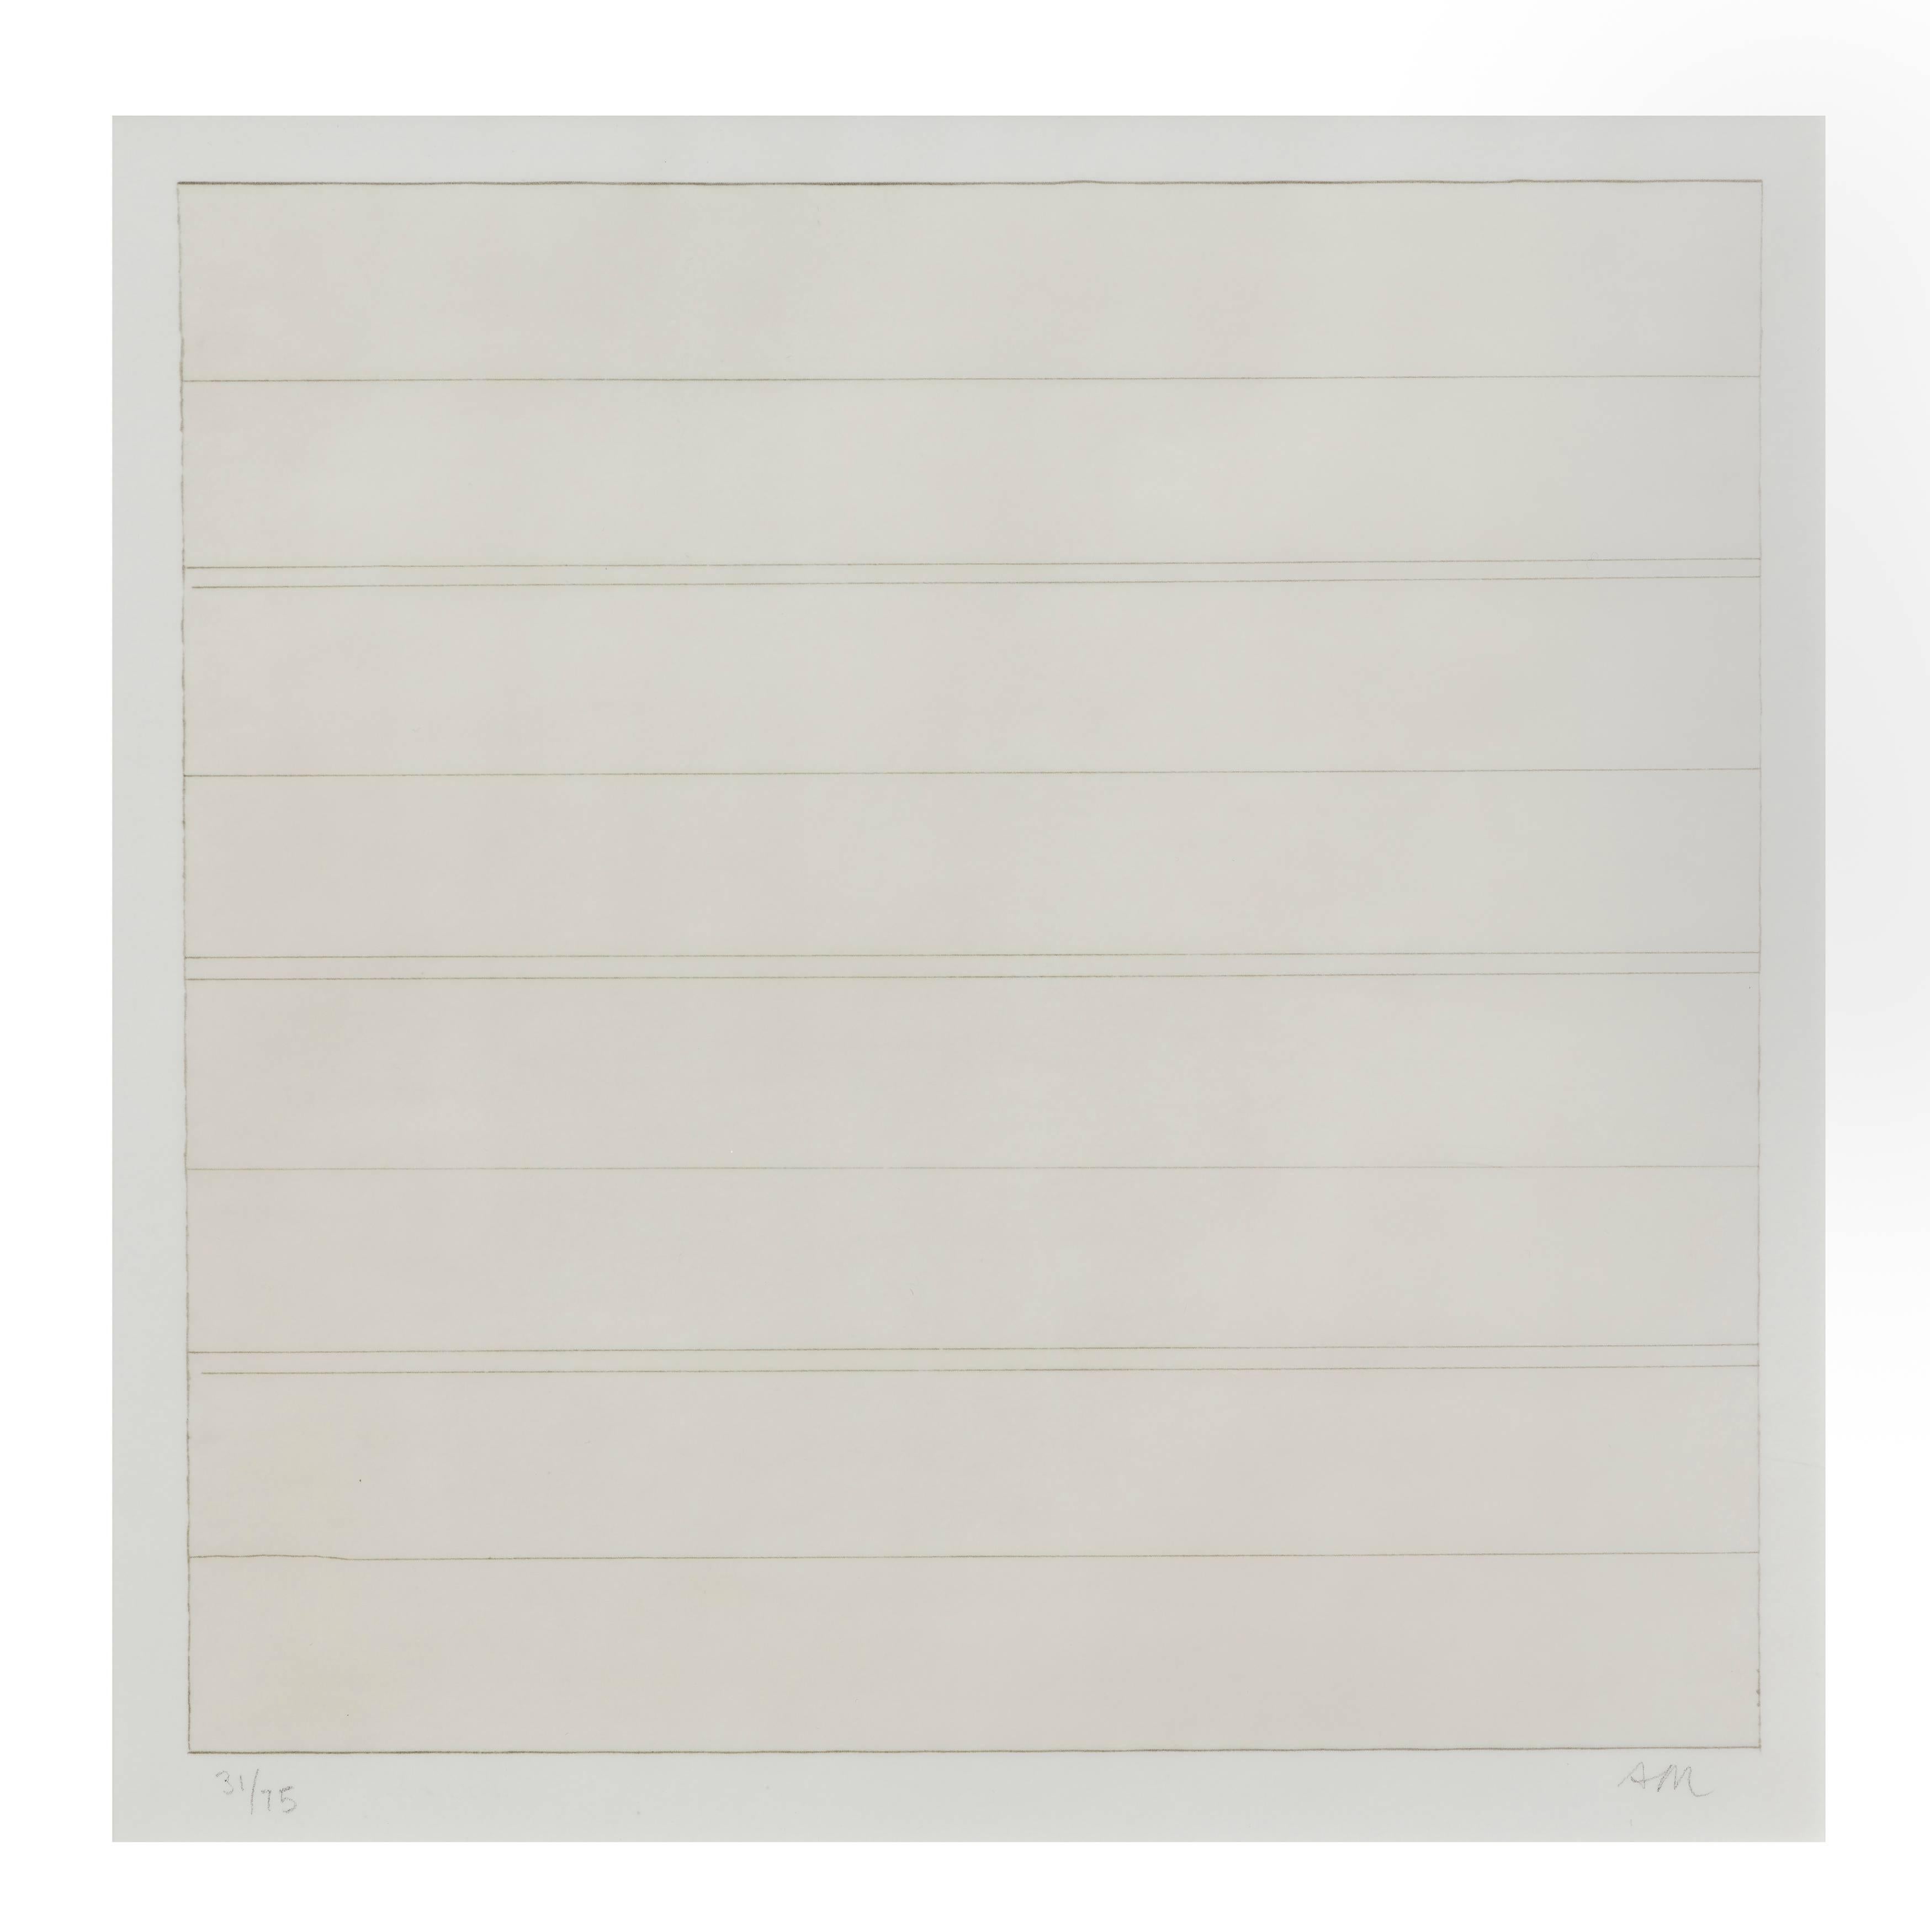 Agnes Martin
Untitled, 1998
Set of four lithographs on vellum
12 1/8 x 12 1/8 inches each
Ed. 75